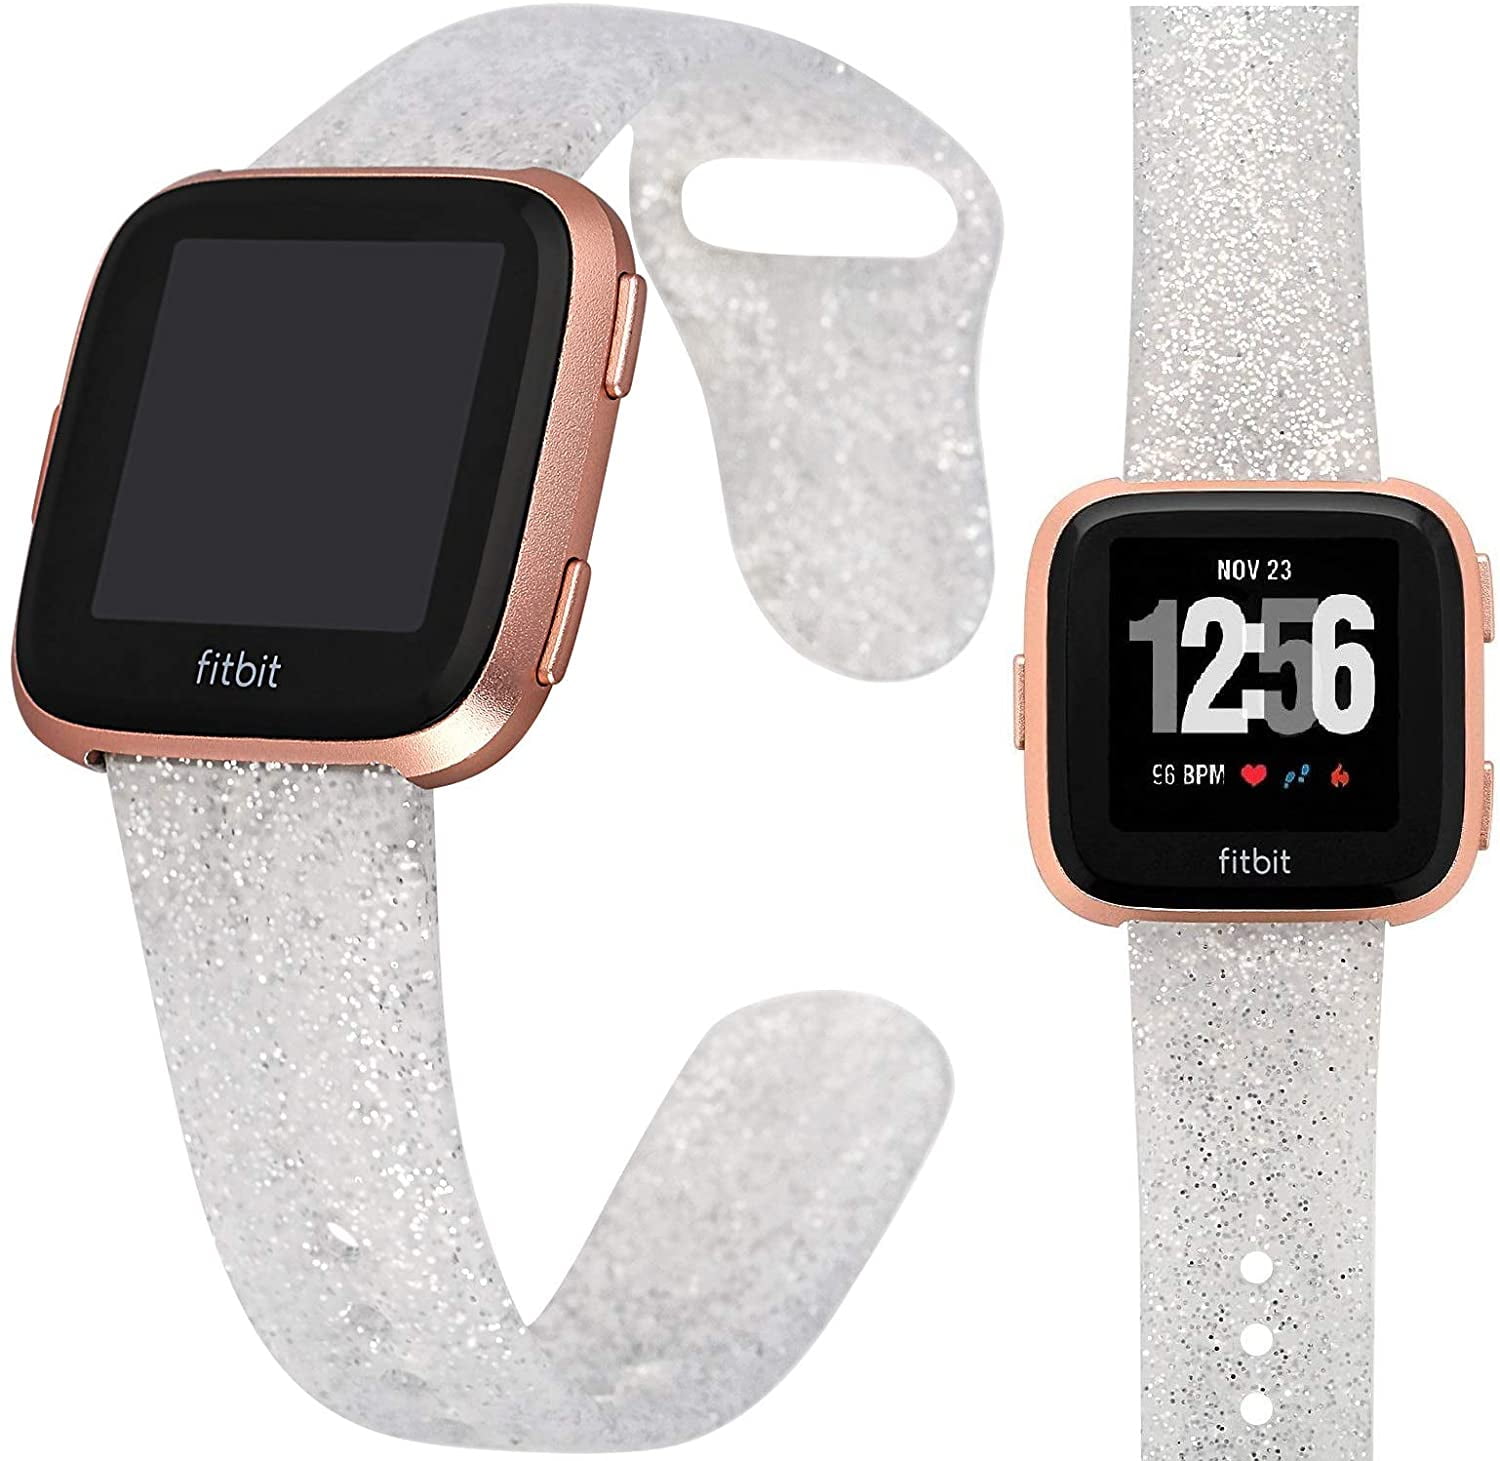 sparkle bands for fitbit versa